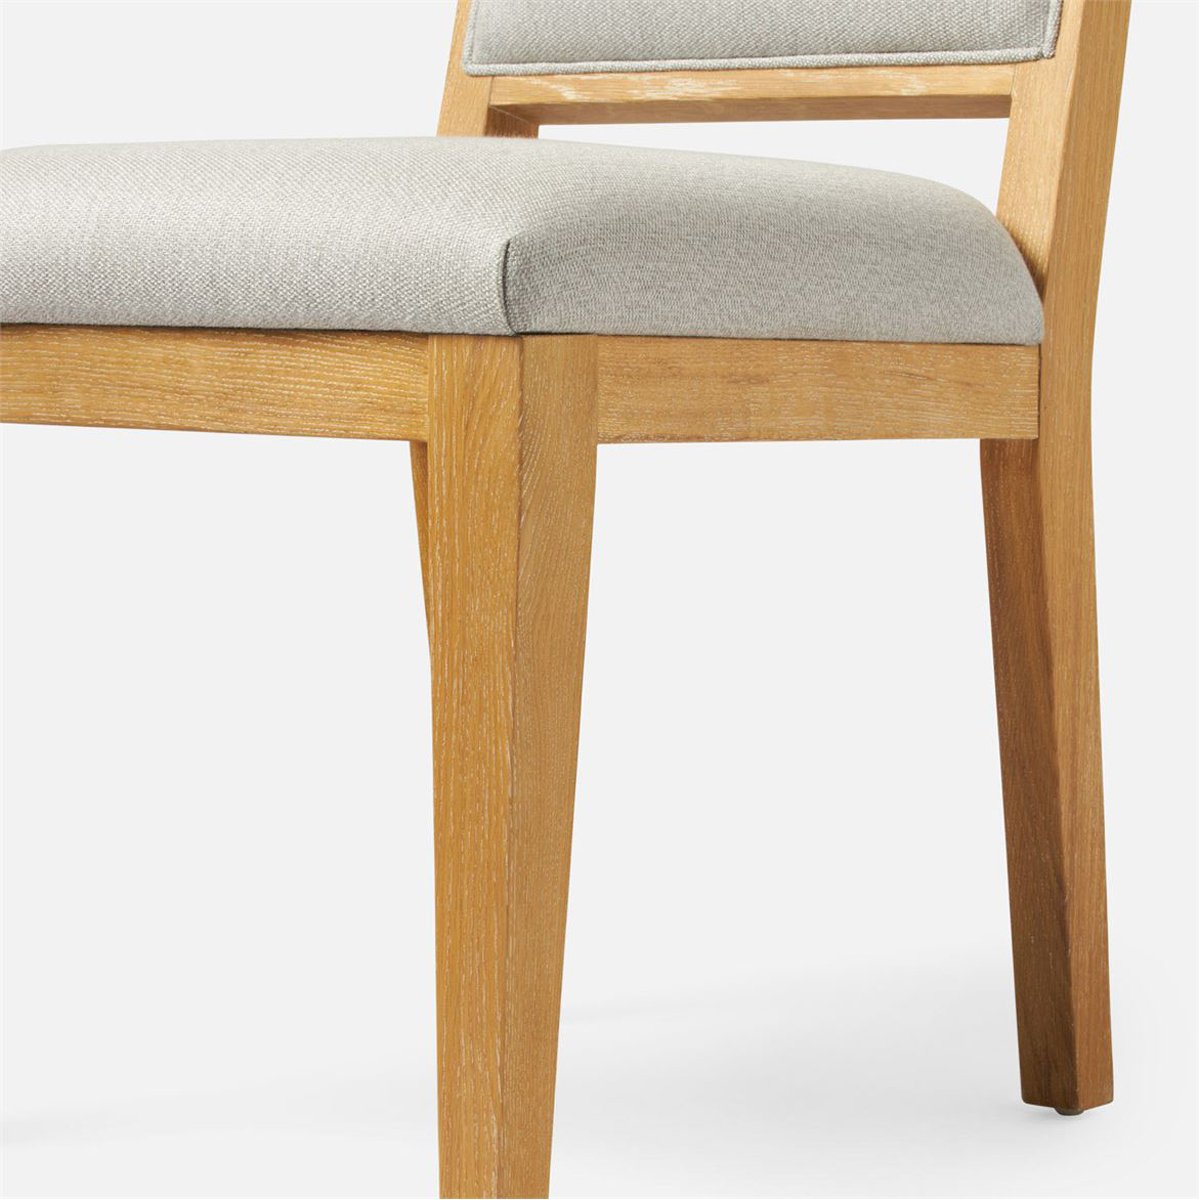 Made Goods Salem Upholstered Dining Chair in Severn Canvas